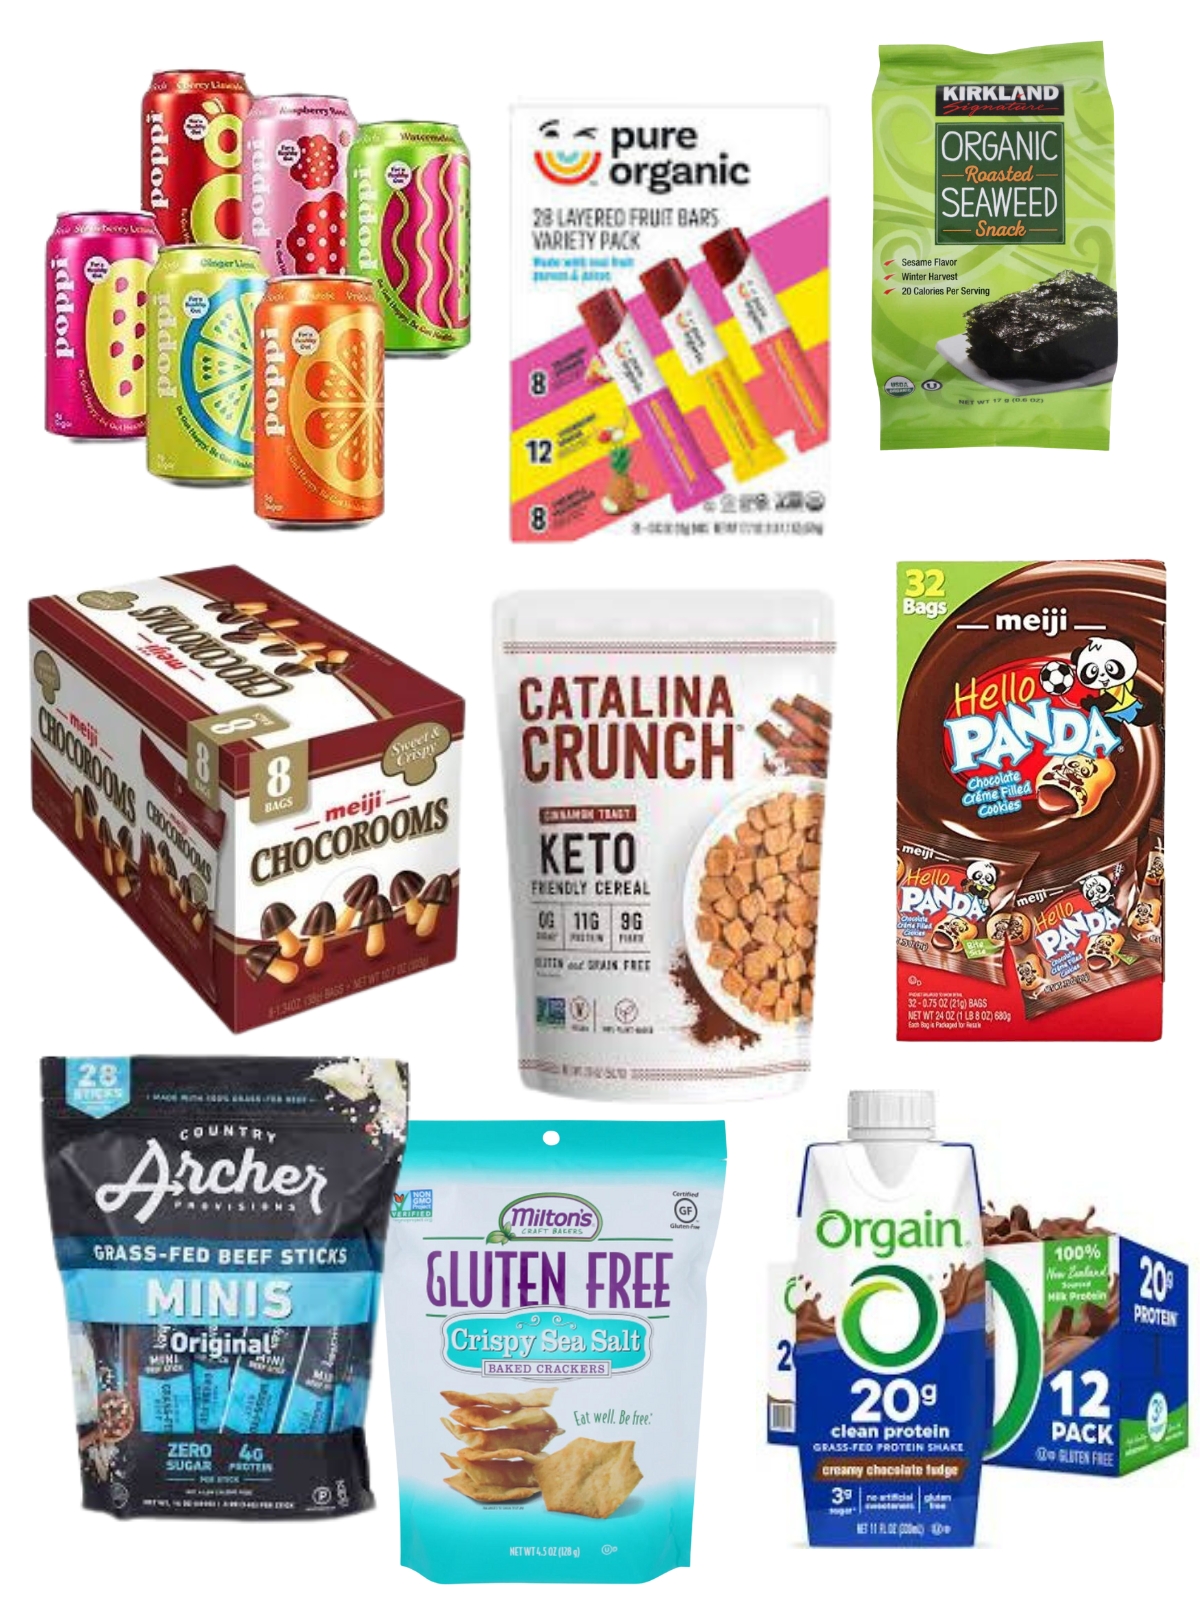 healthy snack foods and drinks available at Costco 